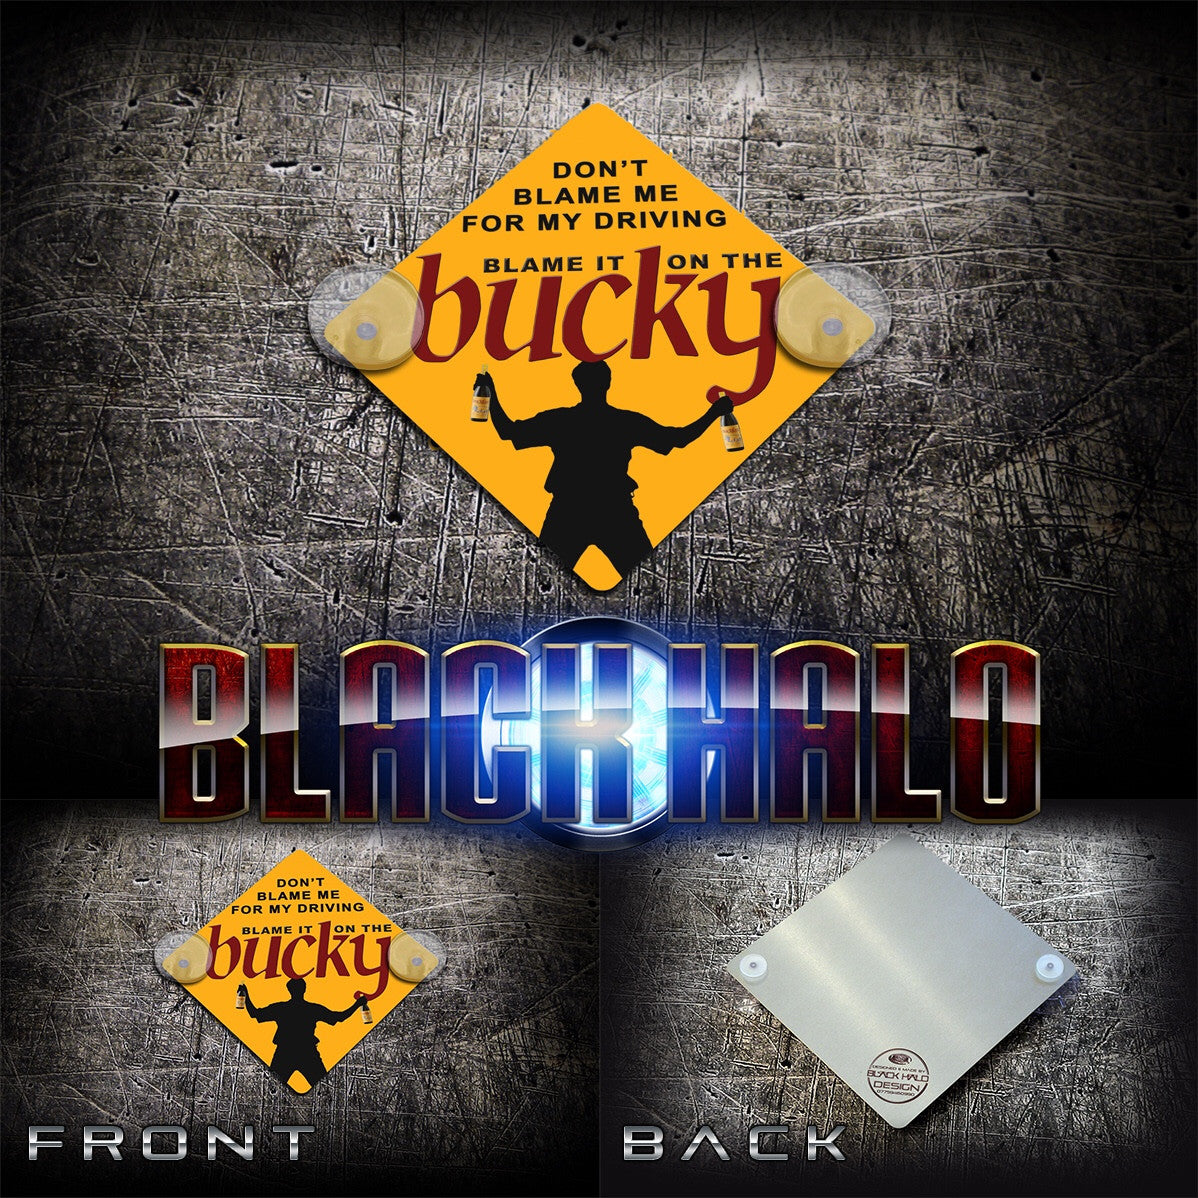 Buckfast Tonic Wine Blame It On The Bucky Metal Car Window Sign and  Suction Cups - Black Halo Design
